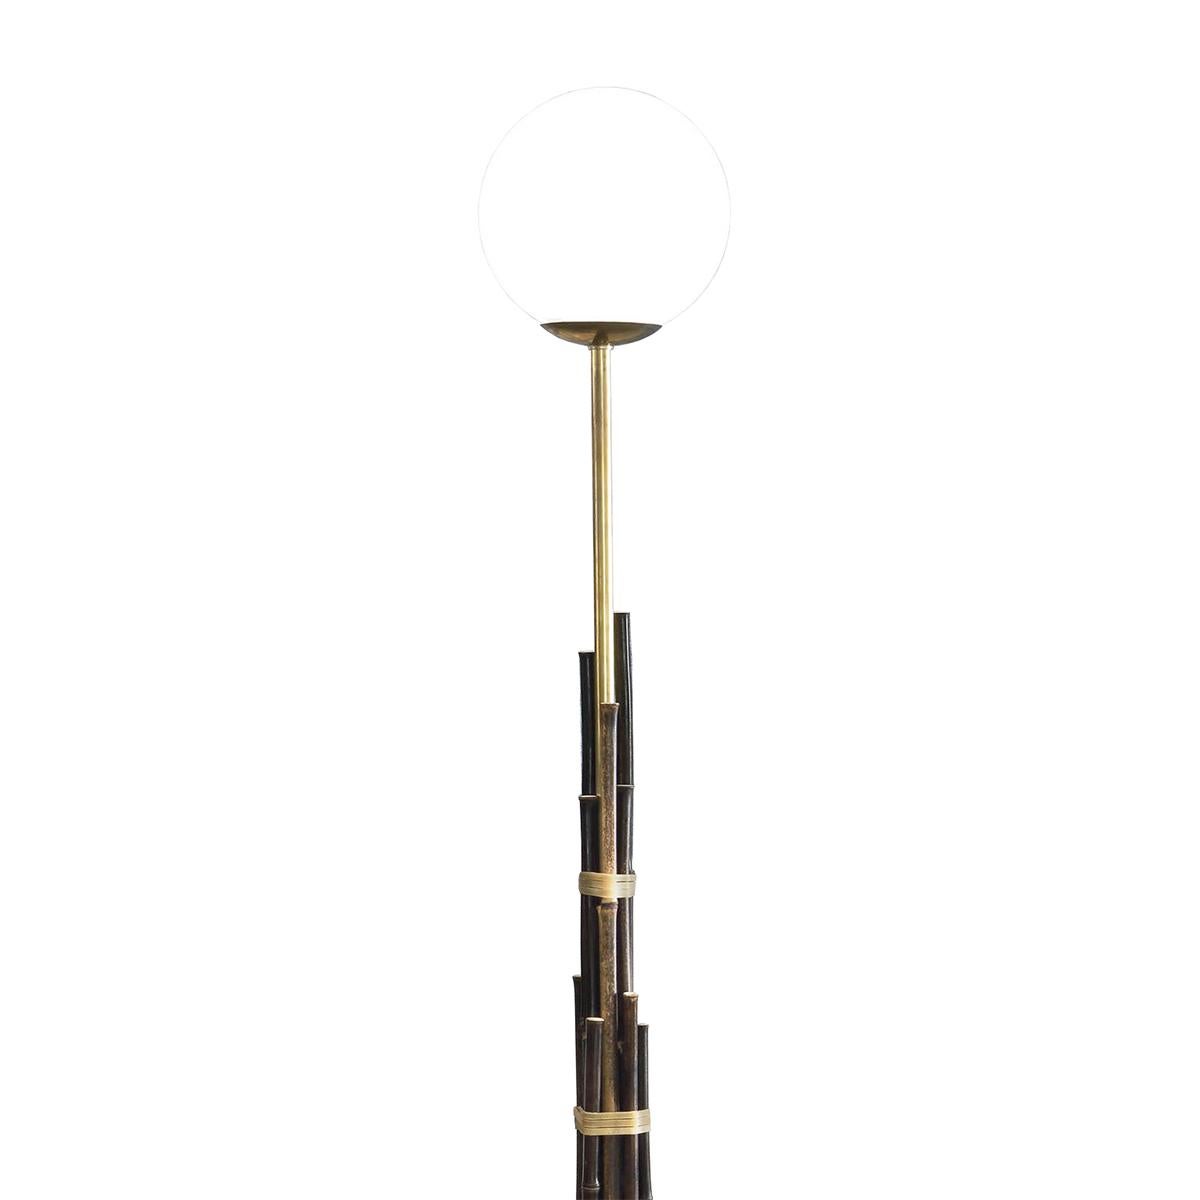 Floor Lamp Bamboos Medium with black bamboo,
With solid painted brass rod with opal glass shade.
Wiring 14W bulb, 220Volt and switch included, lamp
Holder type E27, bulb not included. On casted iron, 
Measures: Base, 30cm diameter.
Available in